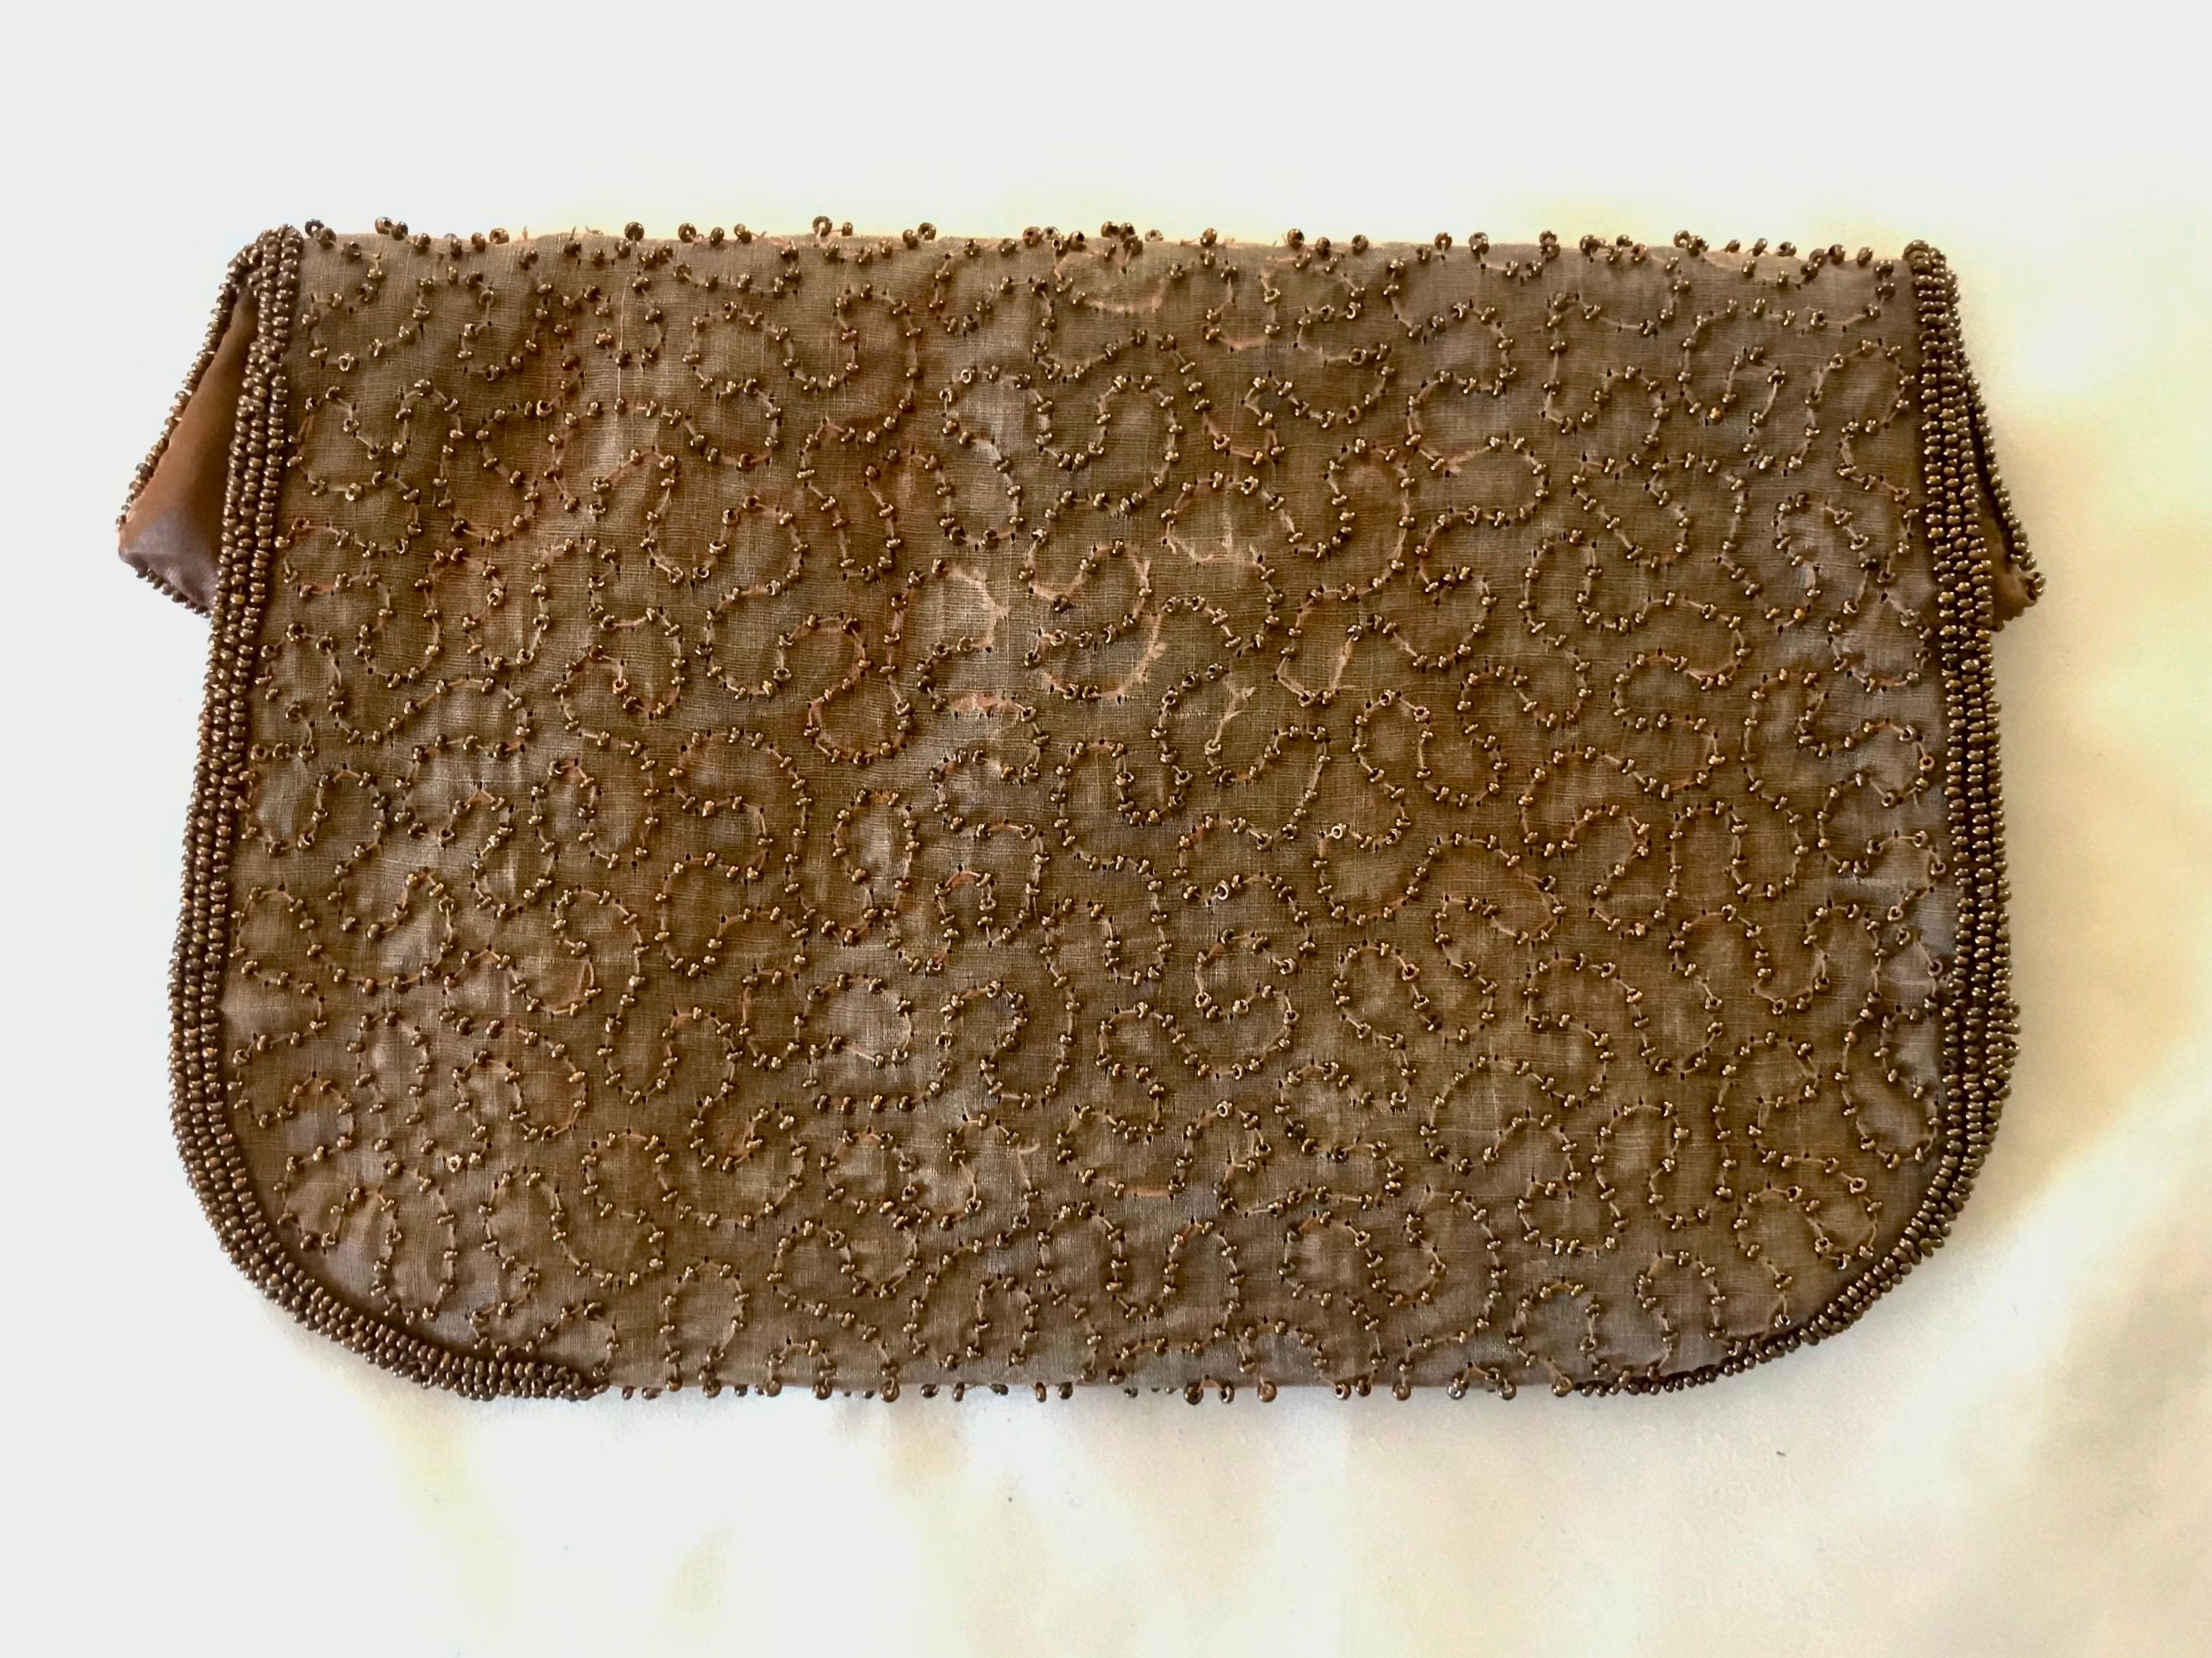 1950s Cocoa Hand-beaded Clutch With Mirror Made in Belgium for | Etsy